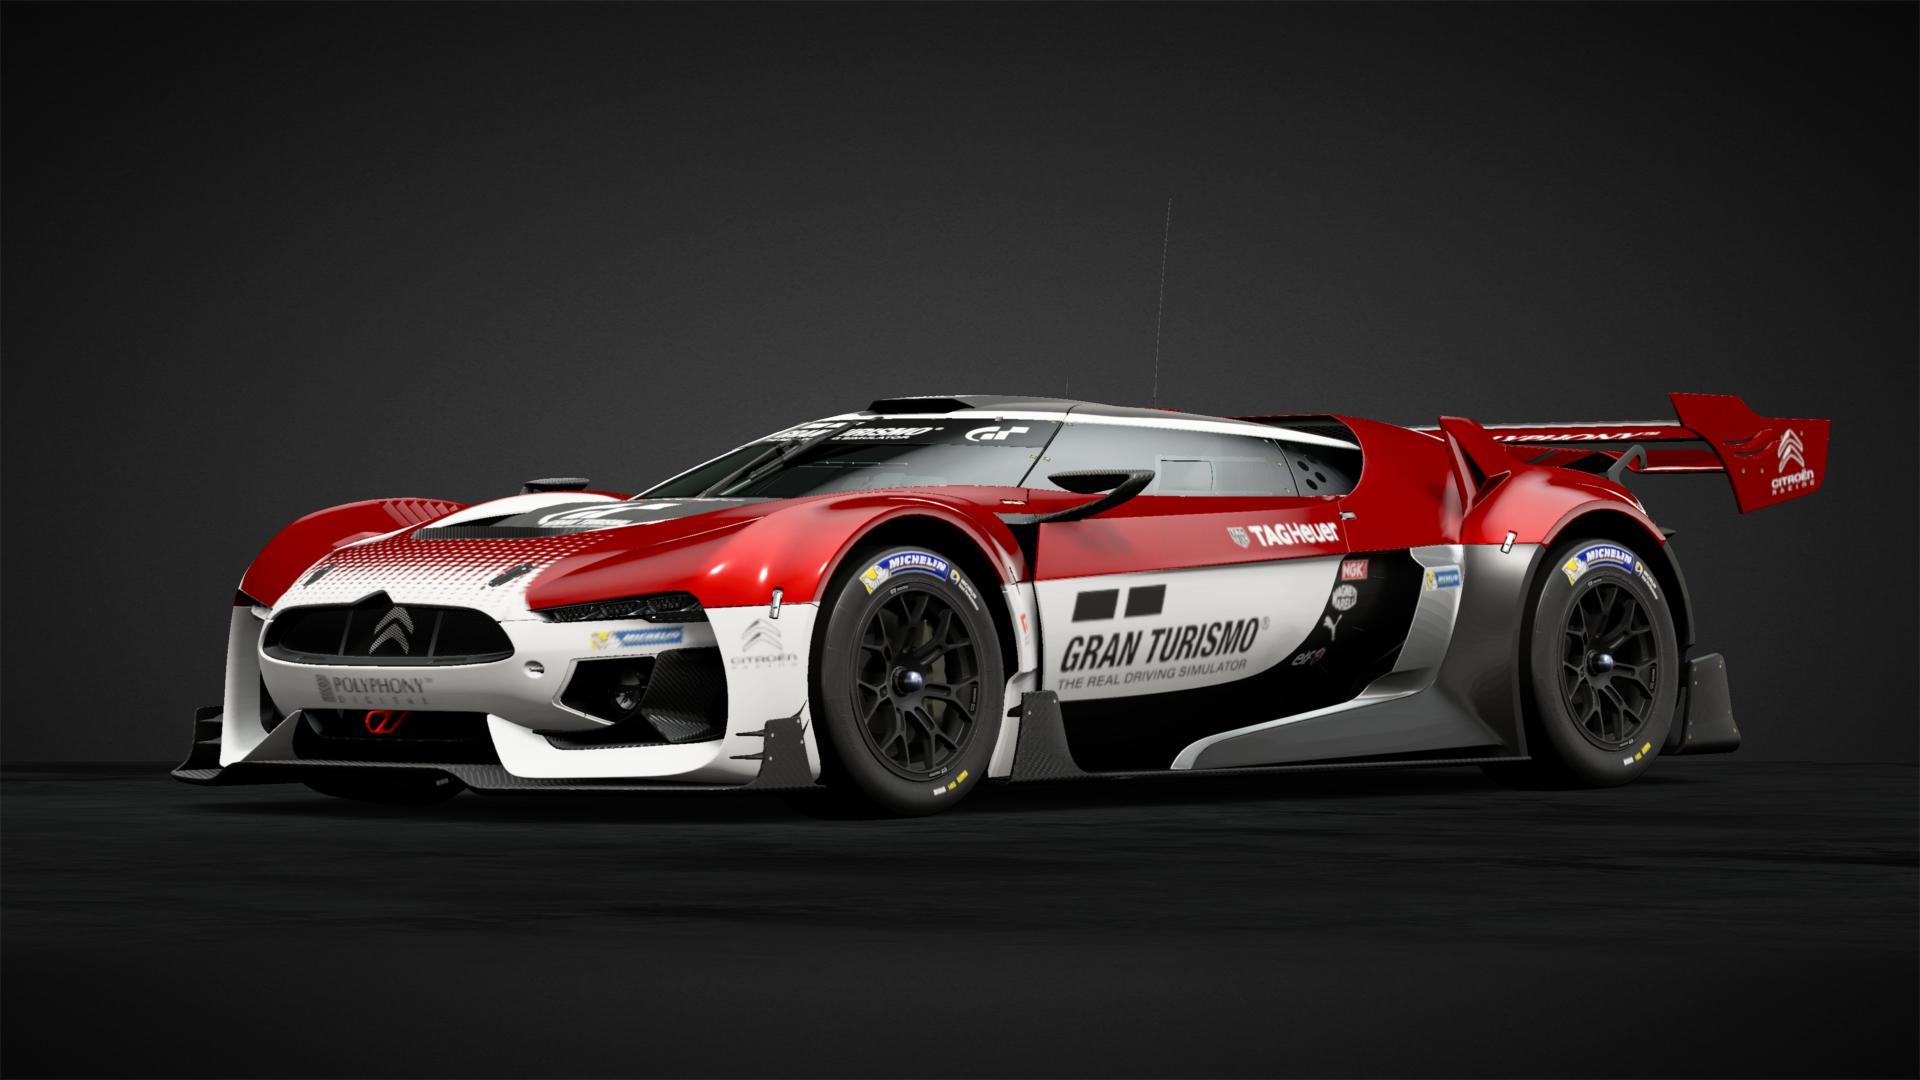 GT by Citroën Gr.3 Racing (Red) Livery